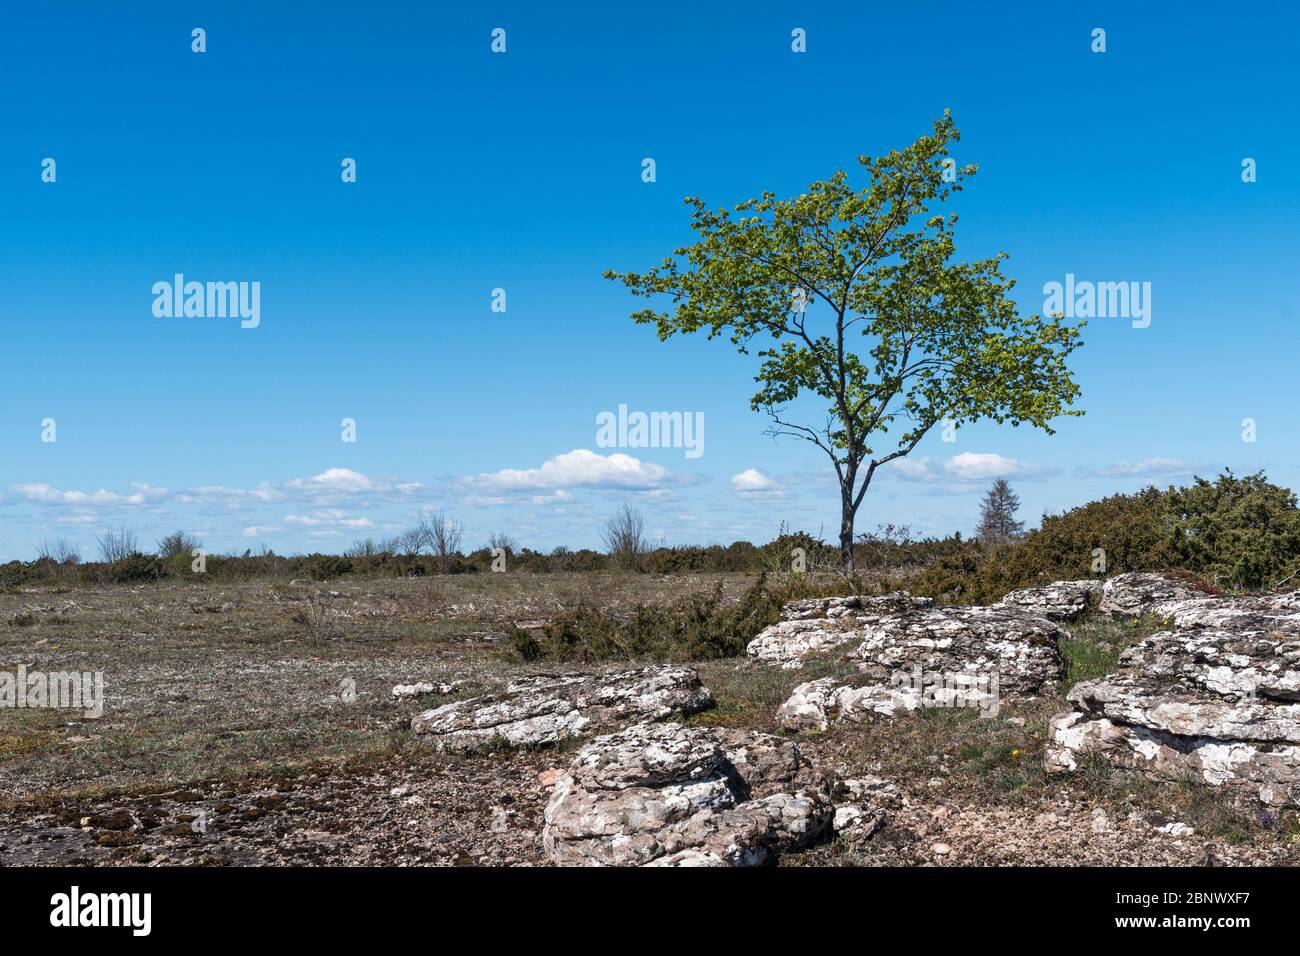 Lone green tree in a barren landscape in the world hertitage site of southern Oland in Sweden Stock Photo